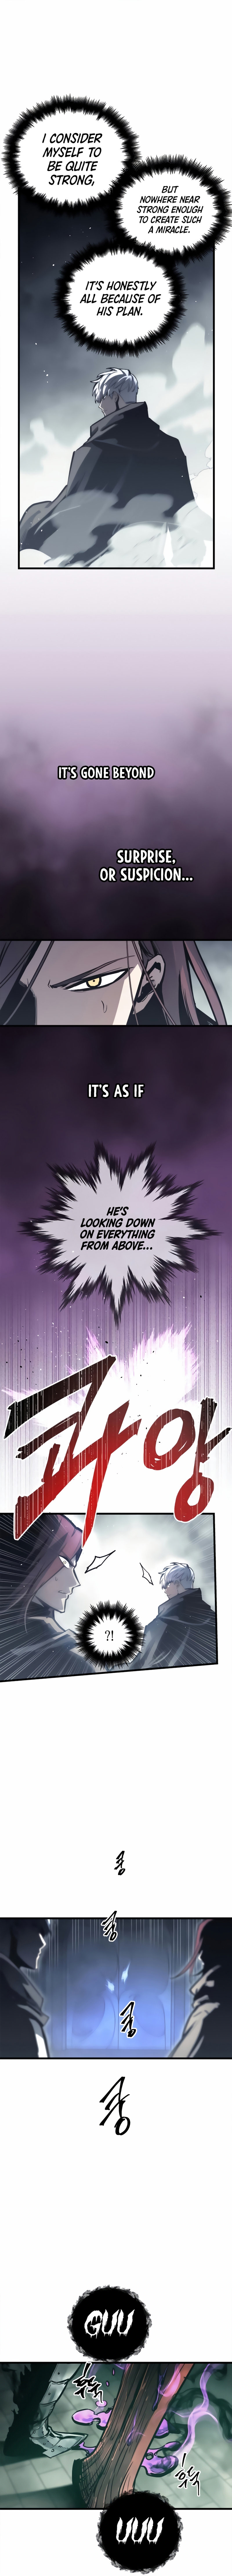 Reincarnation of the Suicidal Battle God - Chapter 27 Page 8